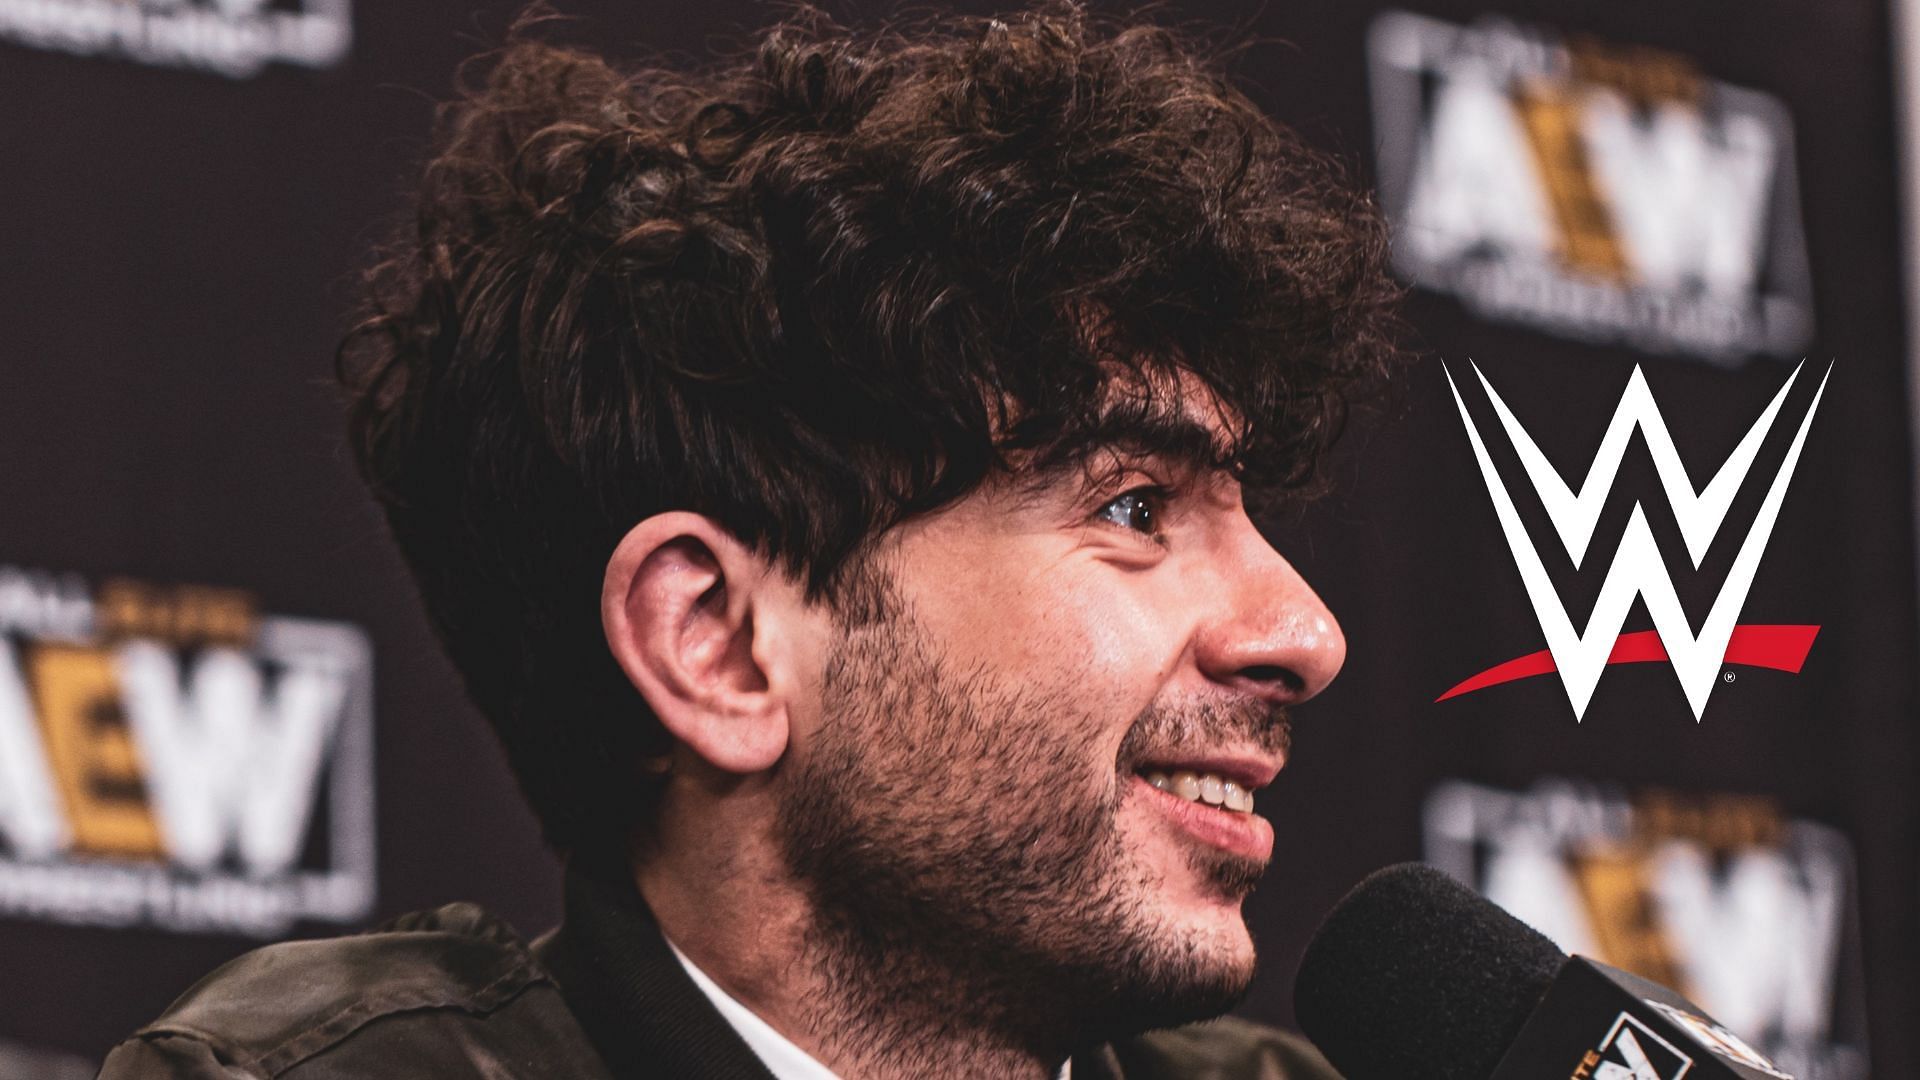 Tony Khan signed this former WWE superstar in very strange circumstances